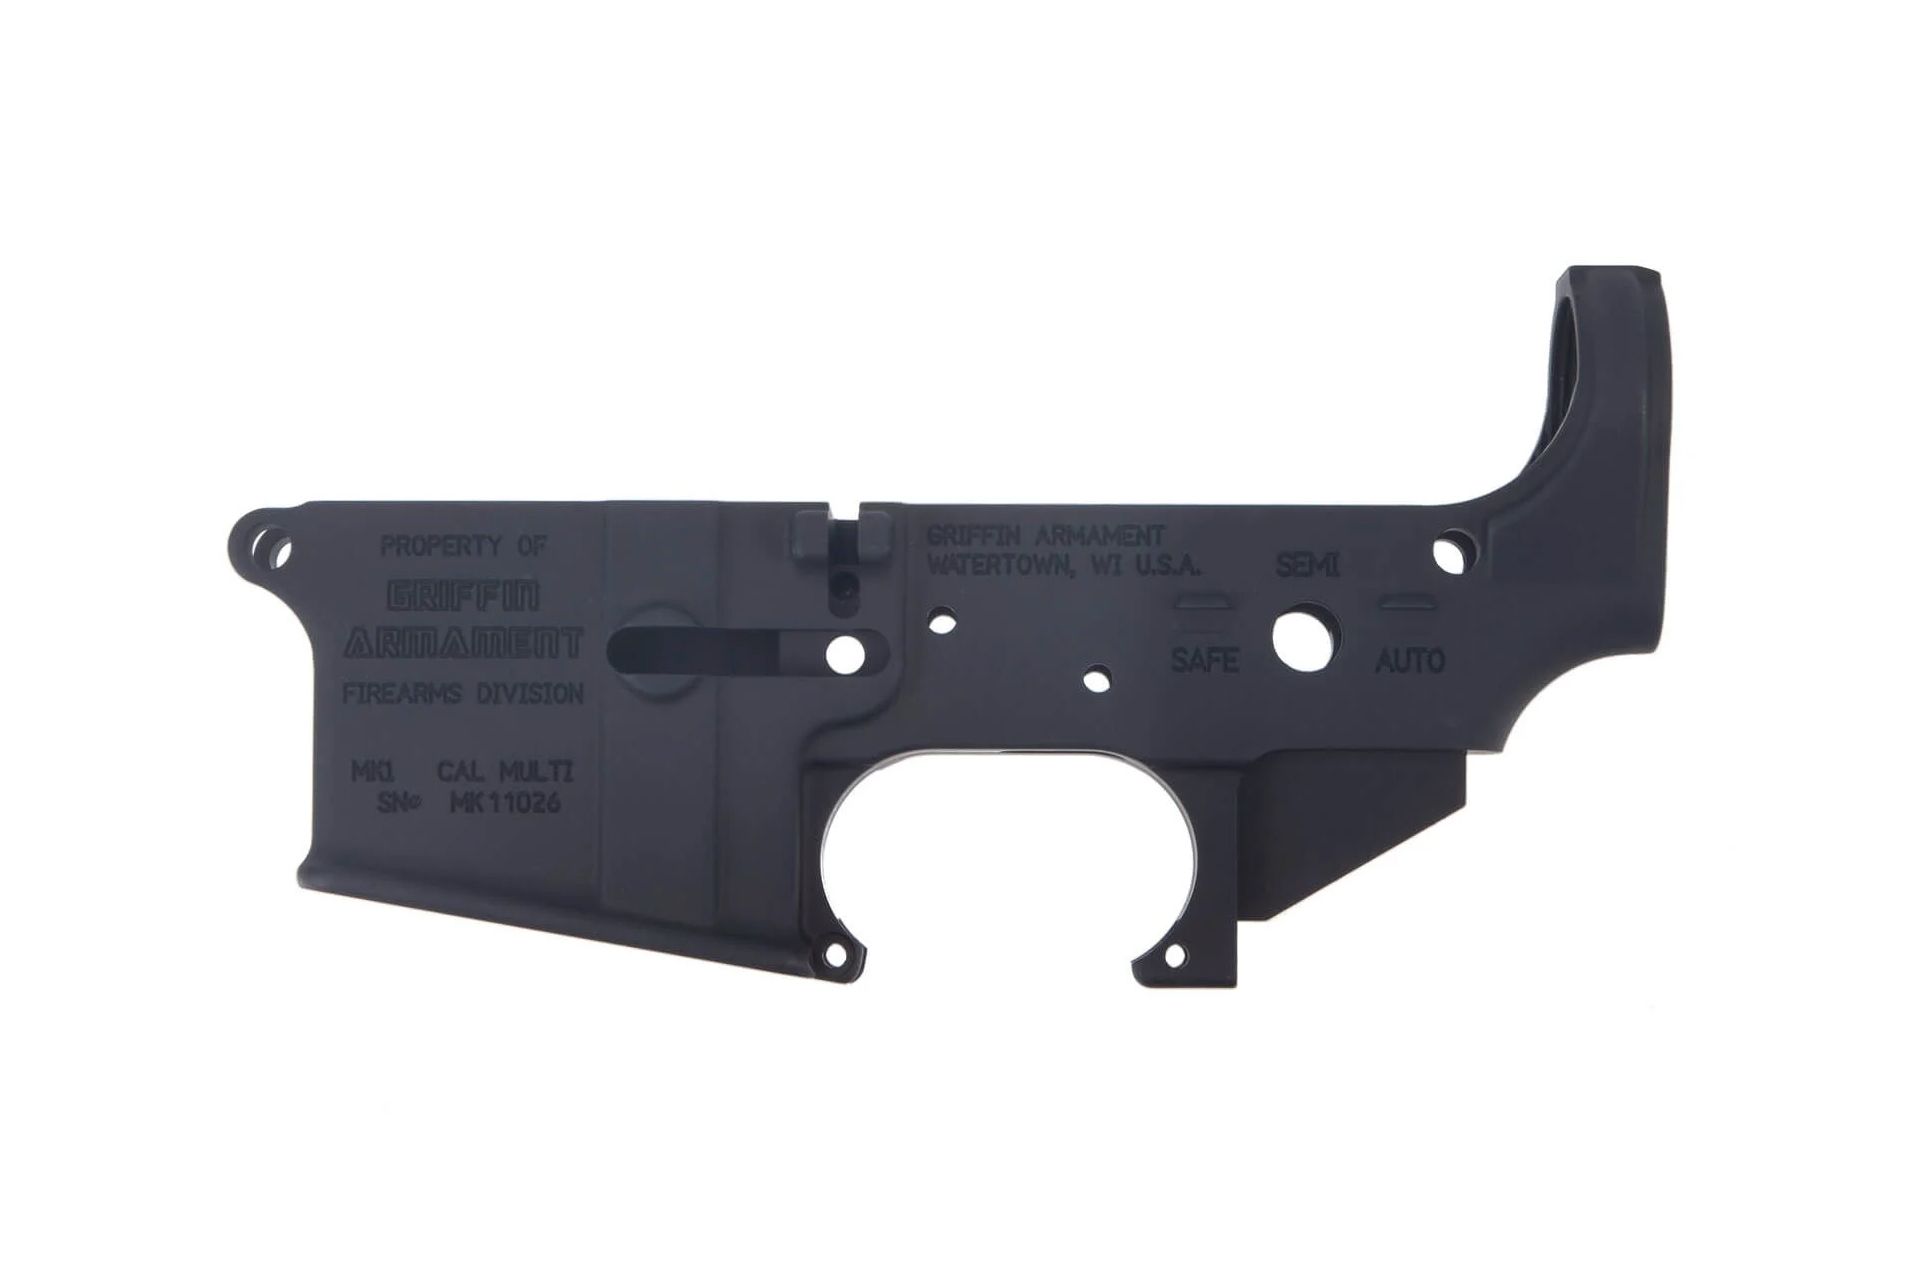 BLEM Griffin Armament MK1 Forged AR-15 Stripped Lower Receiver - $93.46 (Free S/H over $150)